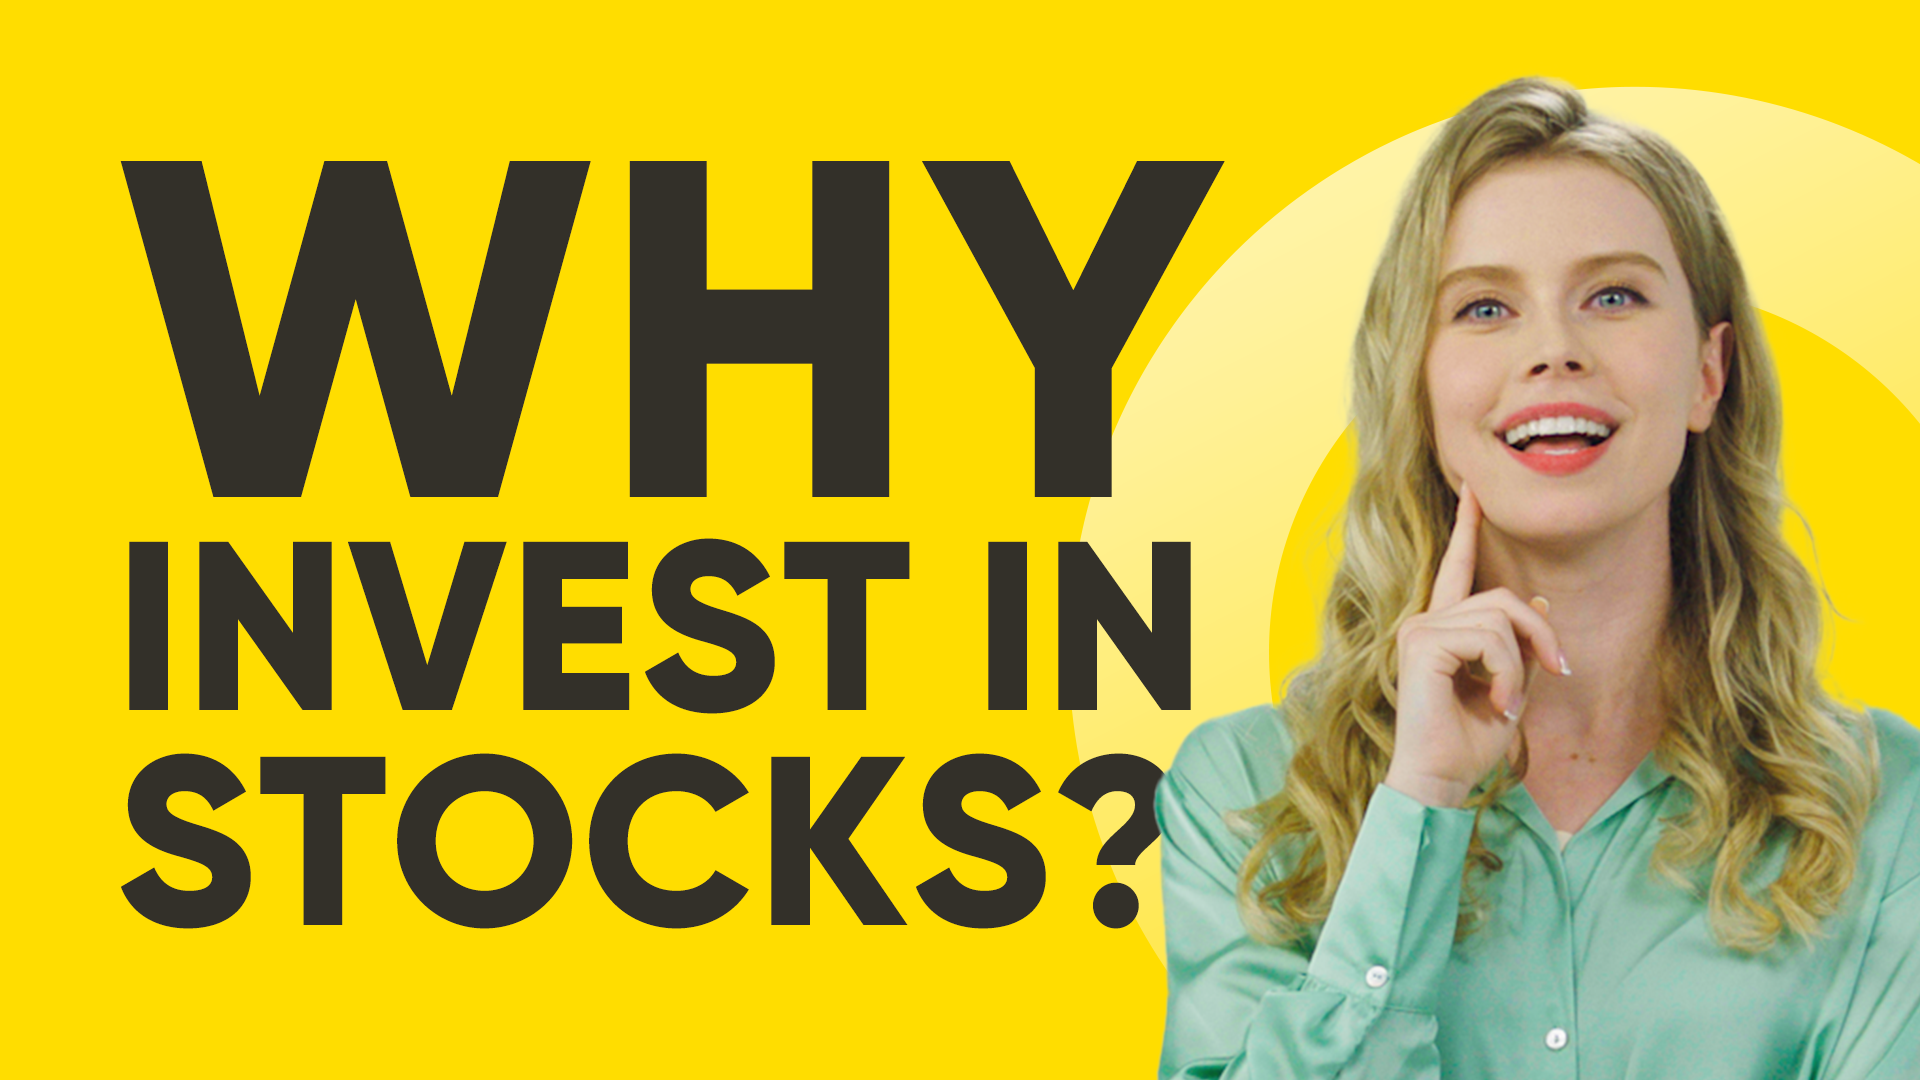 Lesson1: Why is it necessary to learn to invest in stocks?